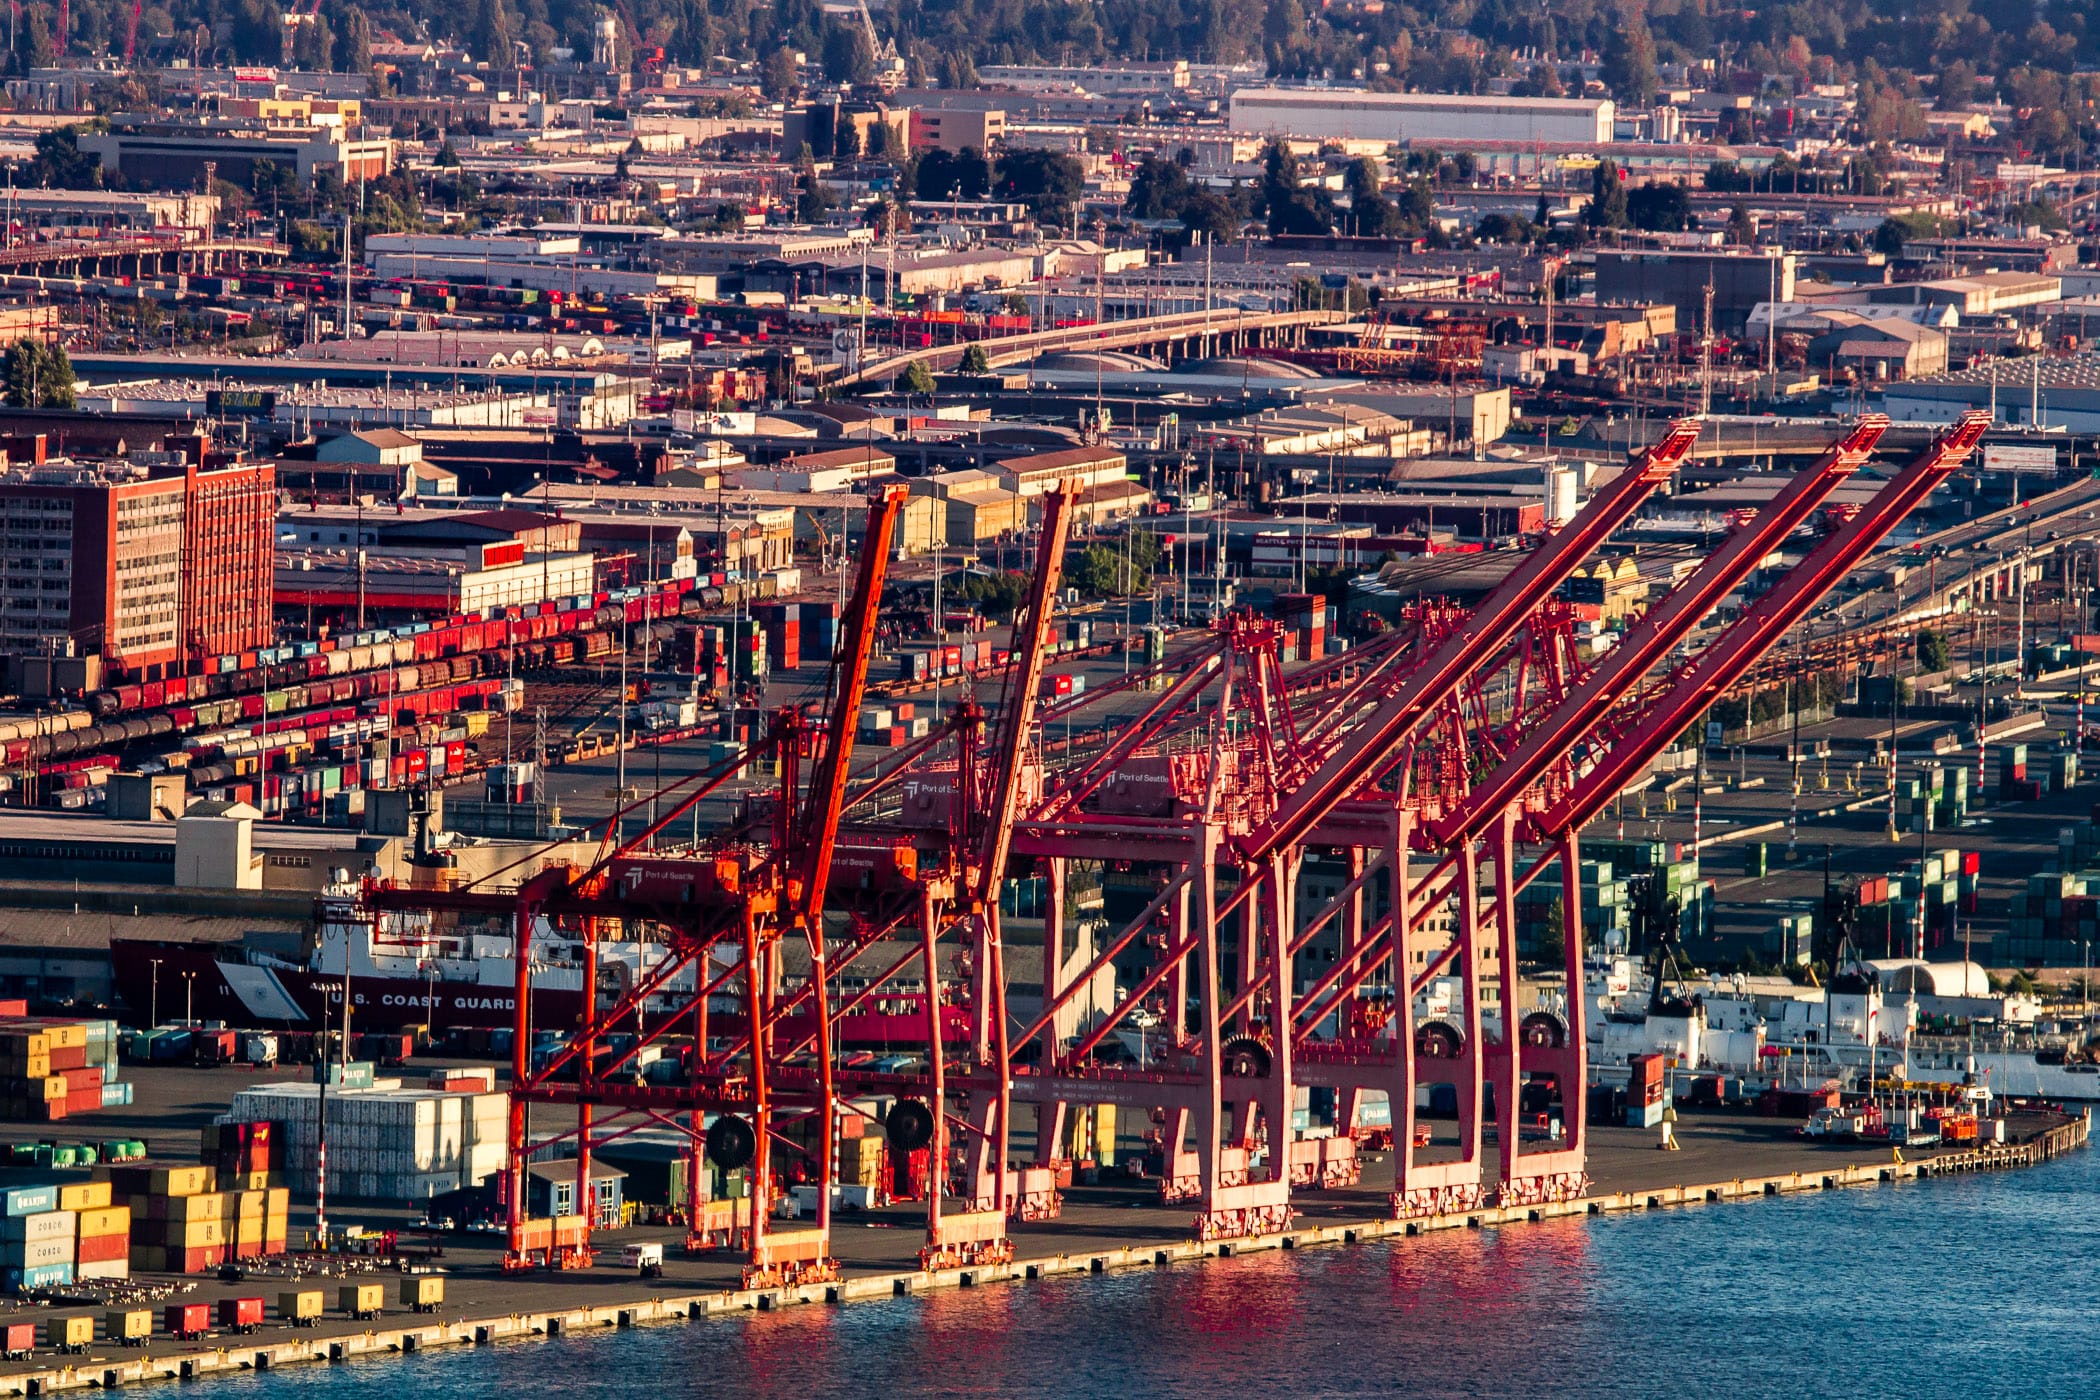 The evening sun illuminates five giant container cranes at the Port of Seattle.